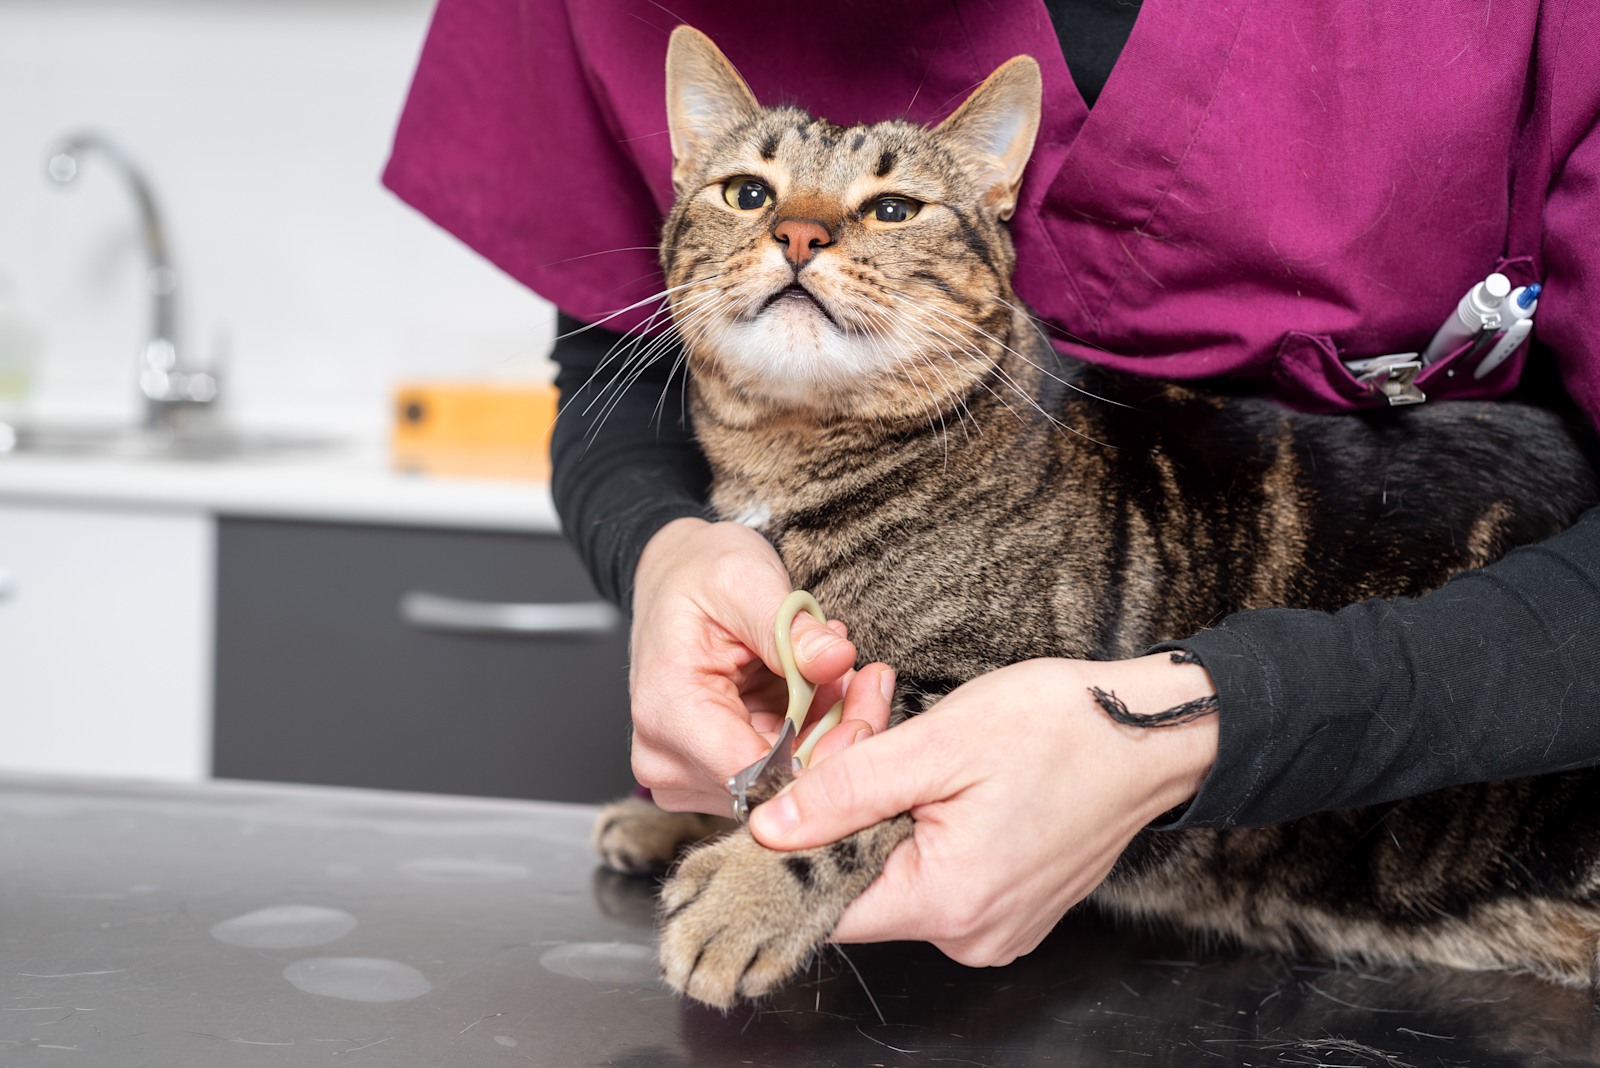 Kitty Claw Control: How and When to Cut Your Cat's Nails - All About Cats